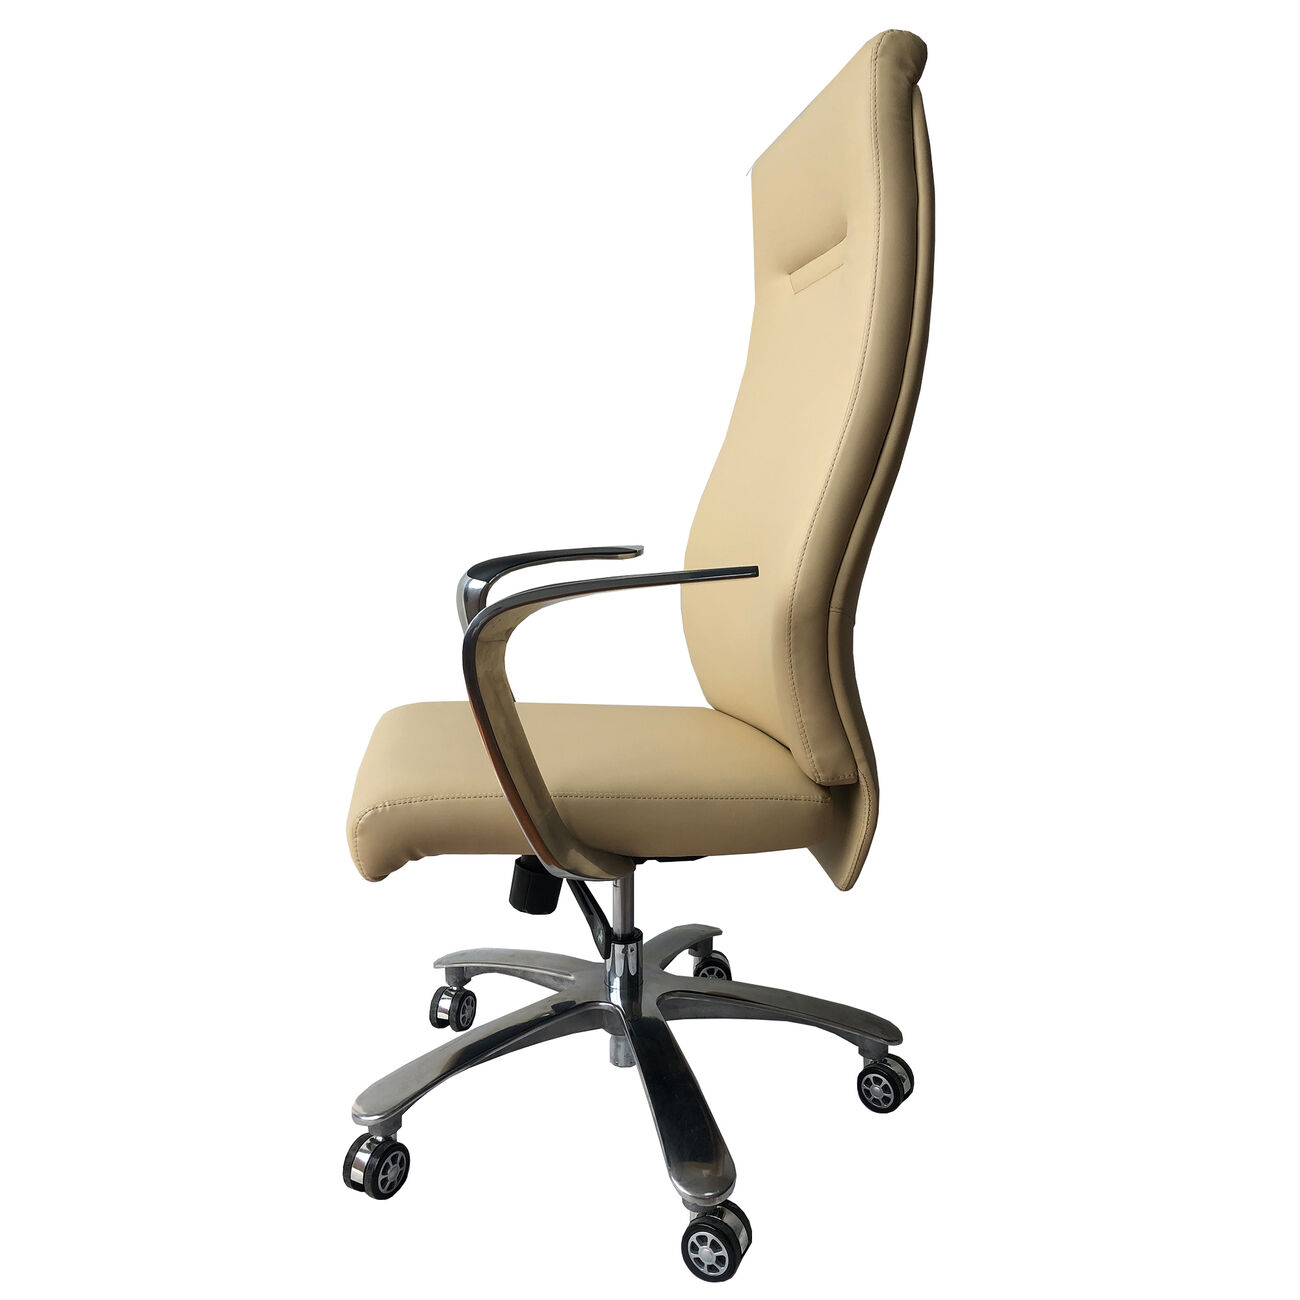 High Back Ergonomic Executive Leatherette Office Swivel Chair with Casters , Beige and Chrome